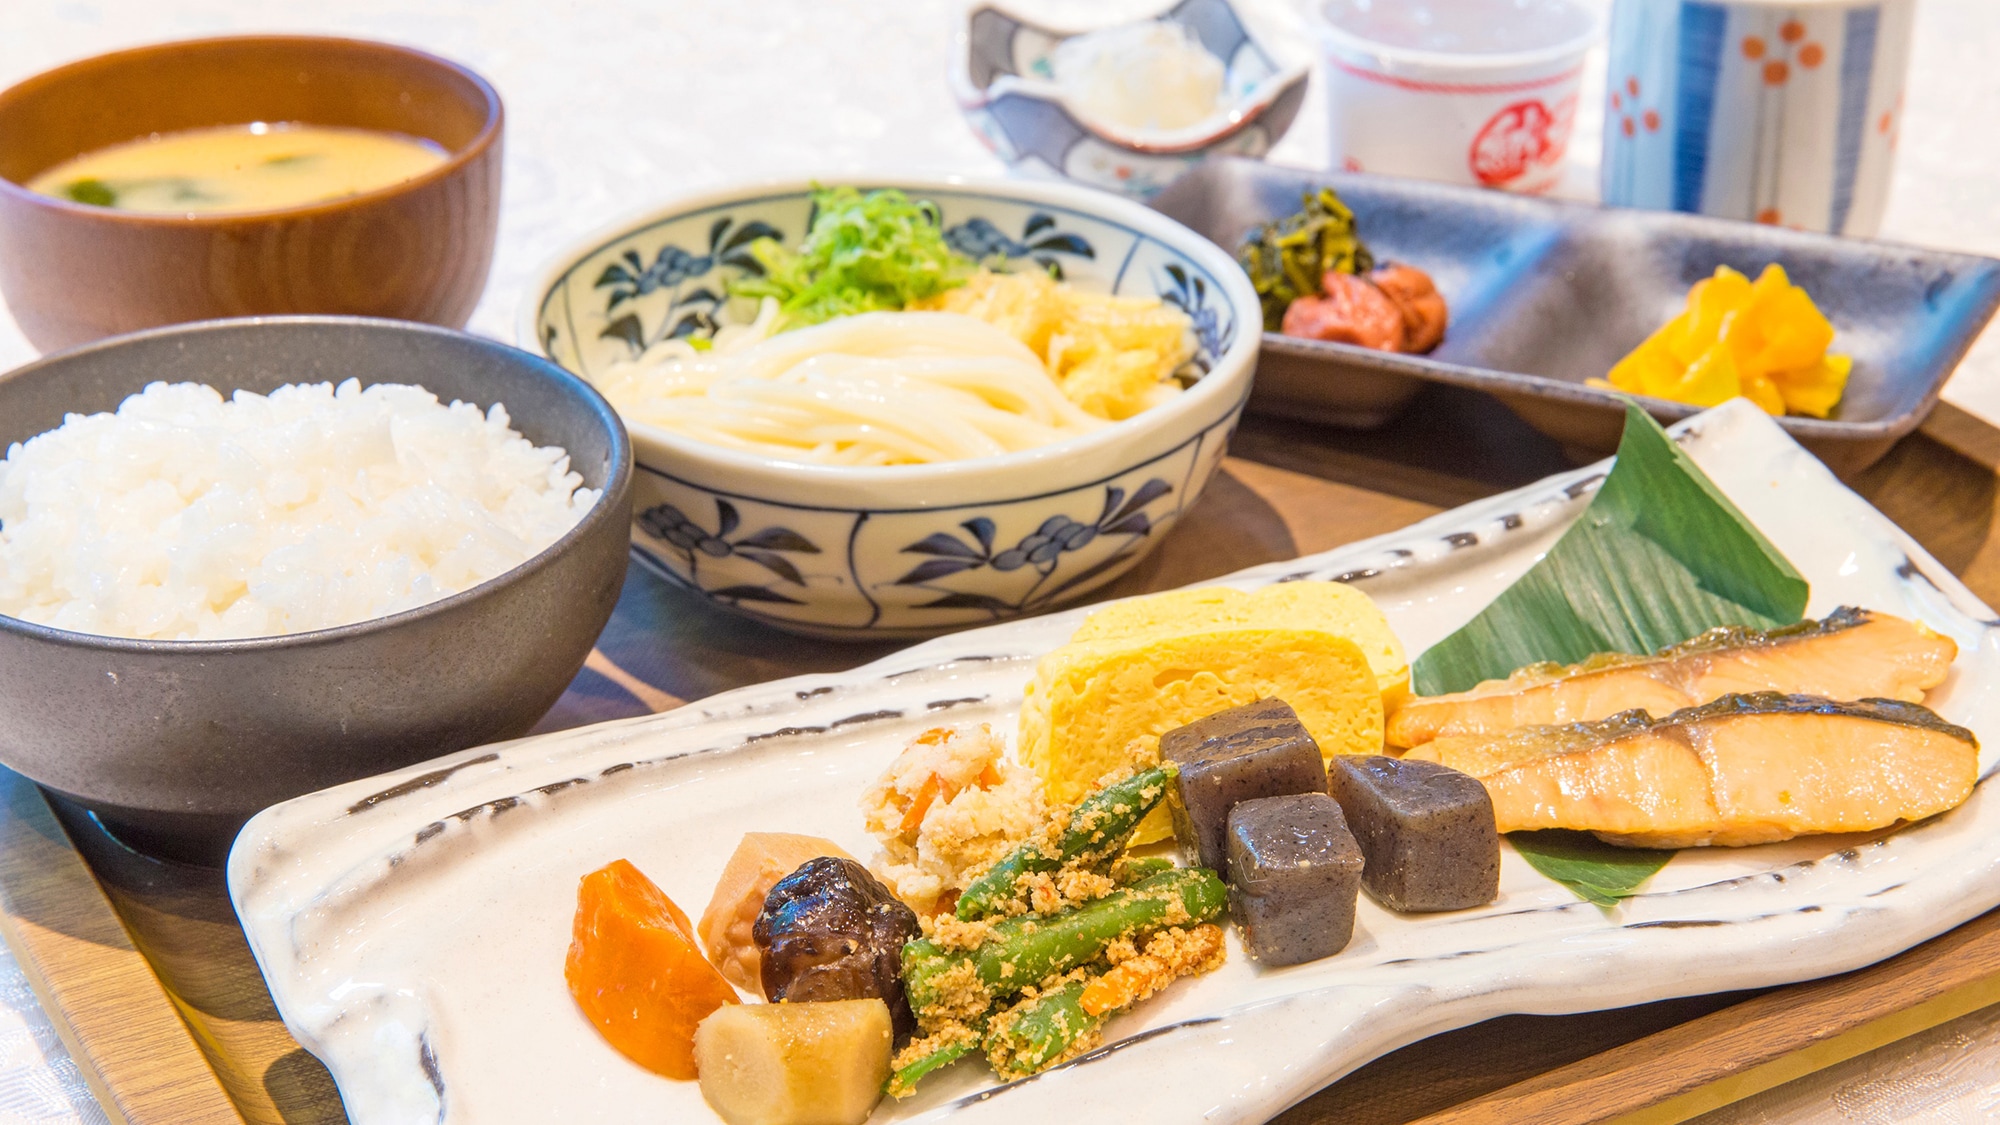 Japanese and Western breakfast buffet (Western food image) Breakfast is a source of energy. Please eat plenty and go out.